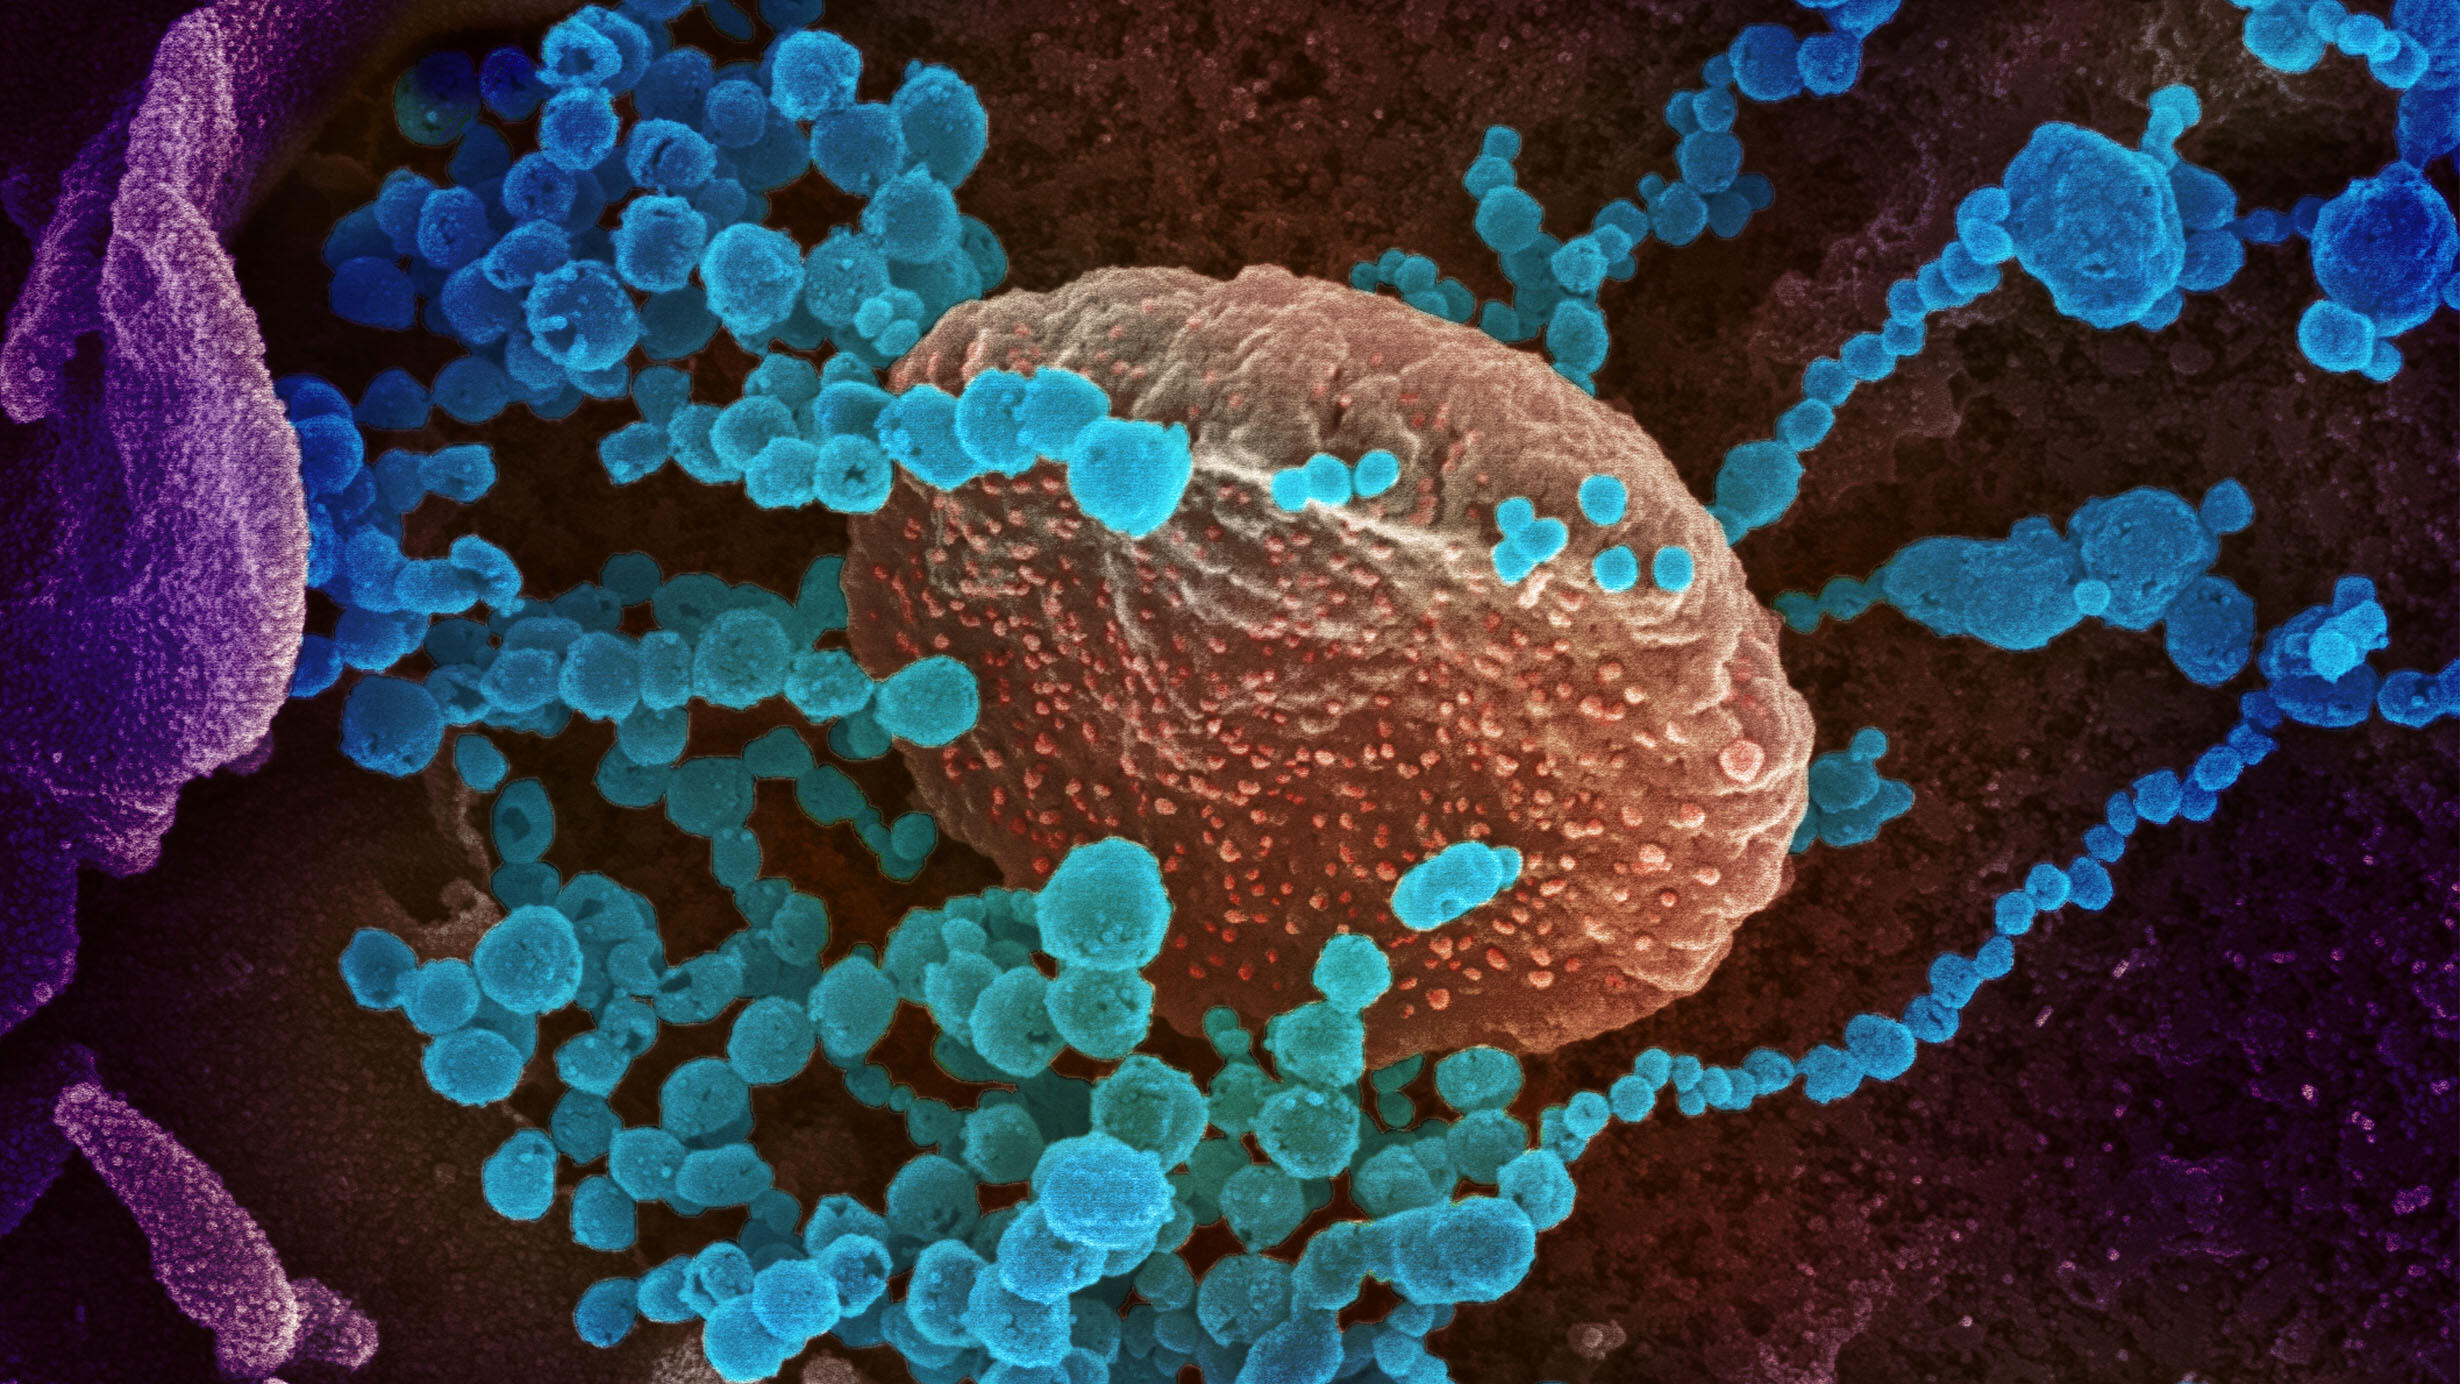 A scanning electron microscope image shows SARS-CoV-2 (small round objects) emerging from the surface of a cell.